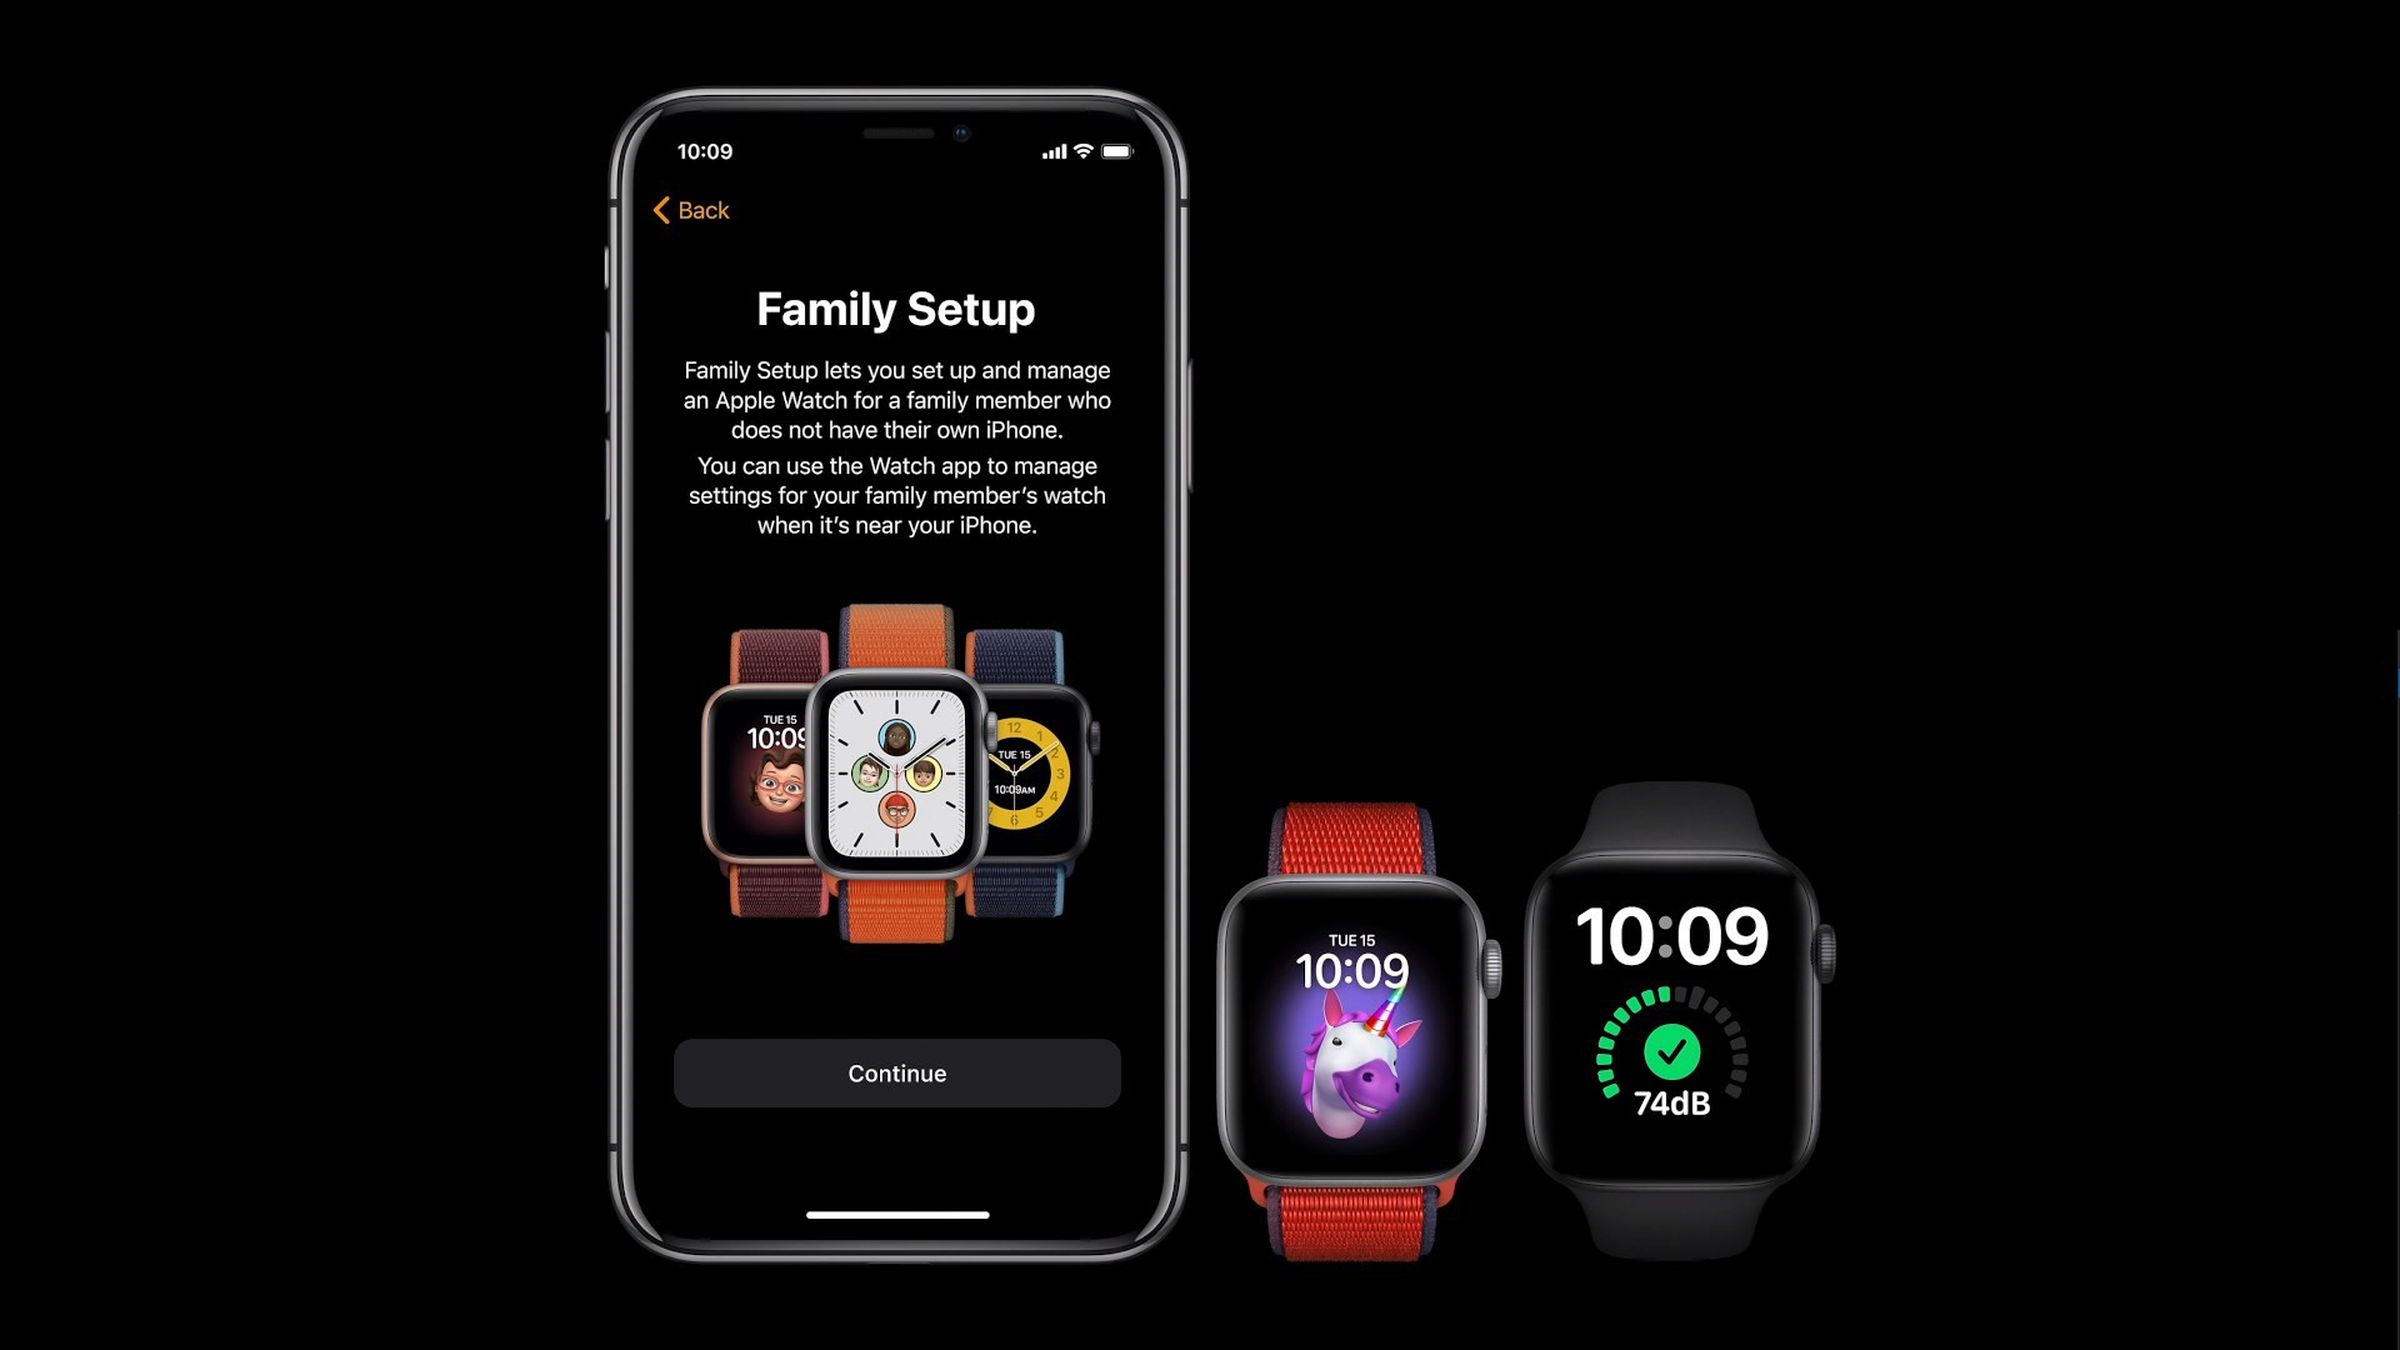 Family Setup allows parents to remotely manage a child’s Apple Watch.